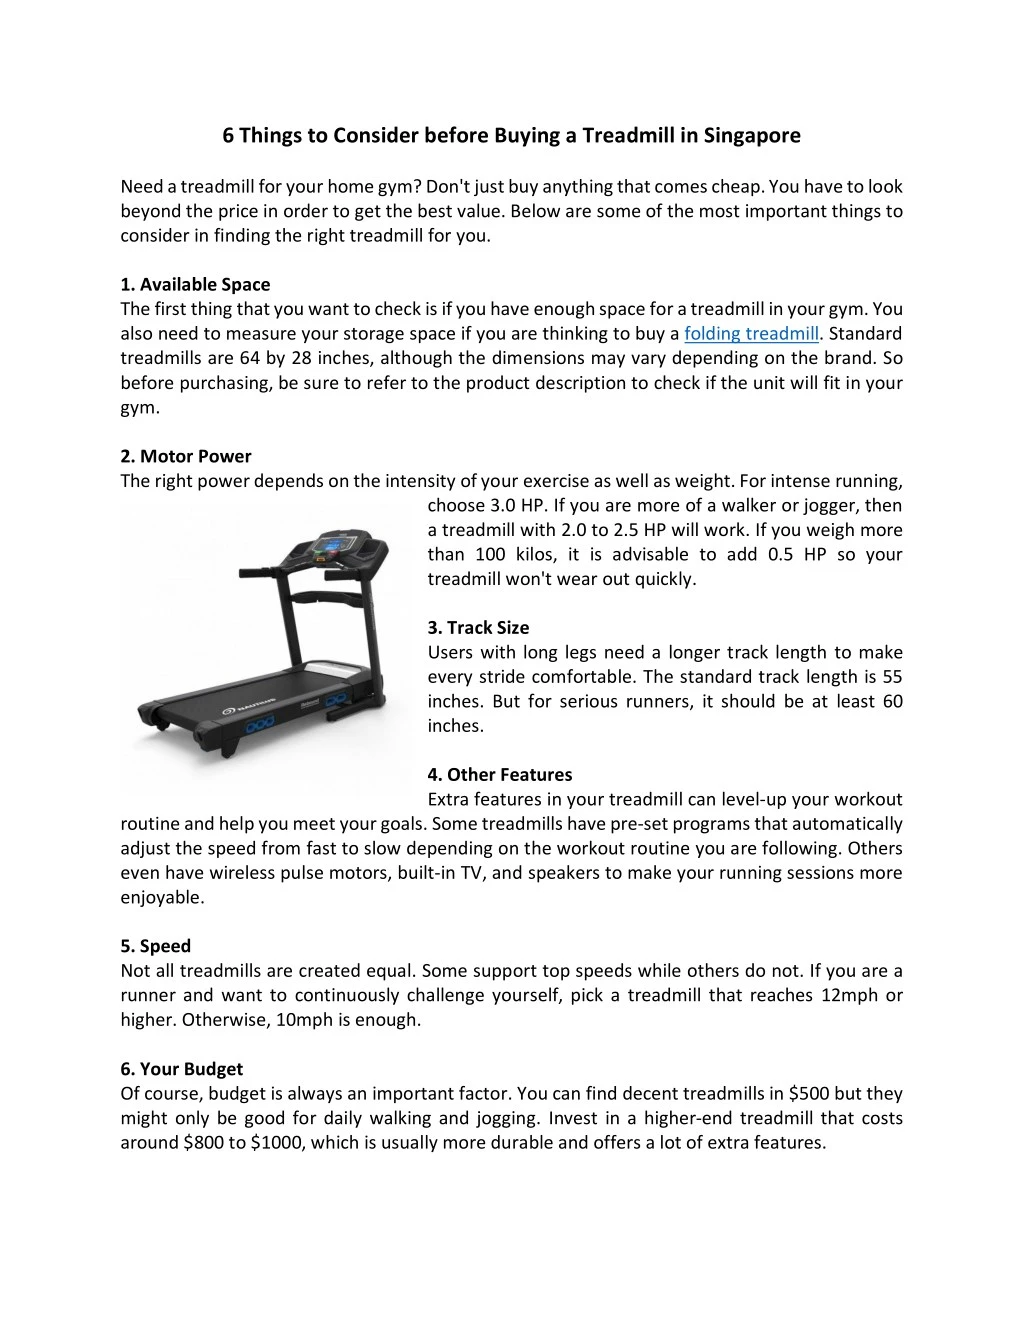 6 things to consider before buying a treadmill